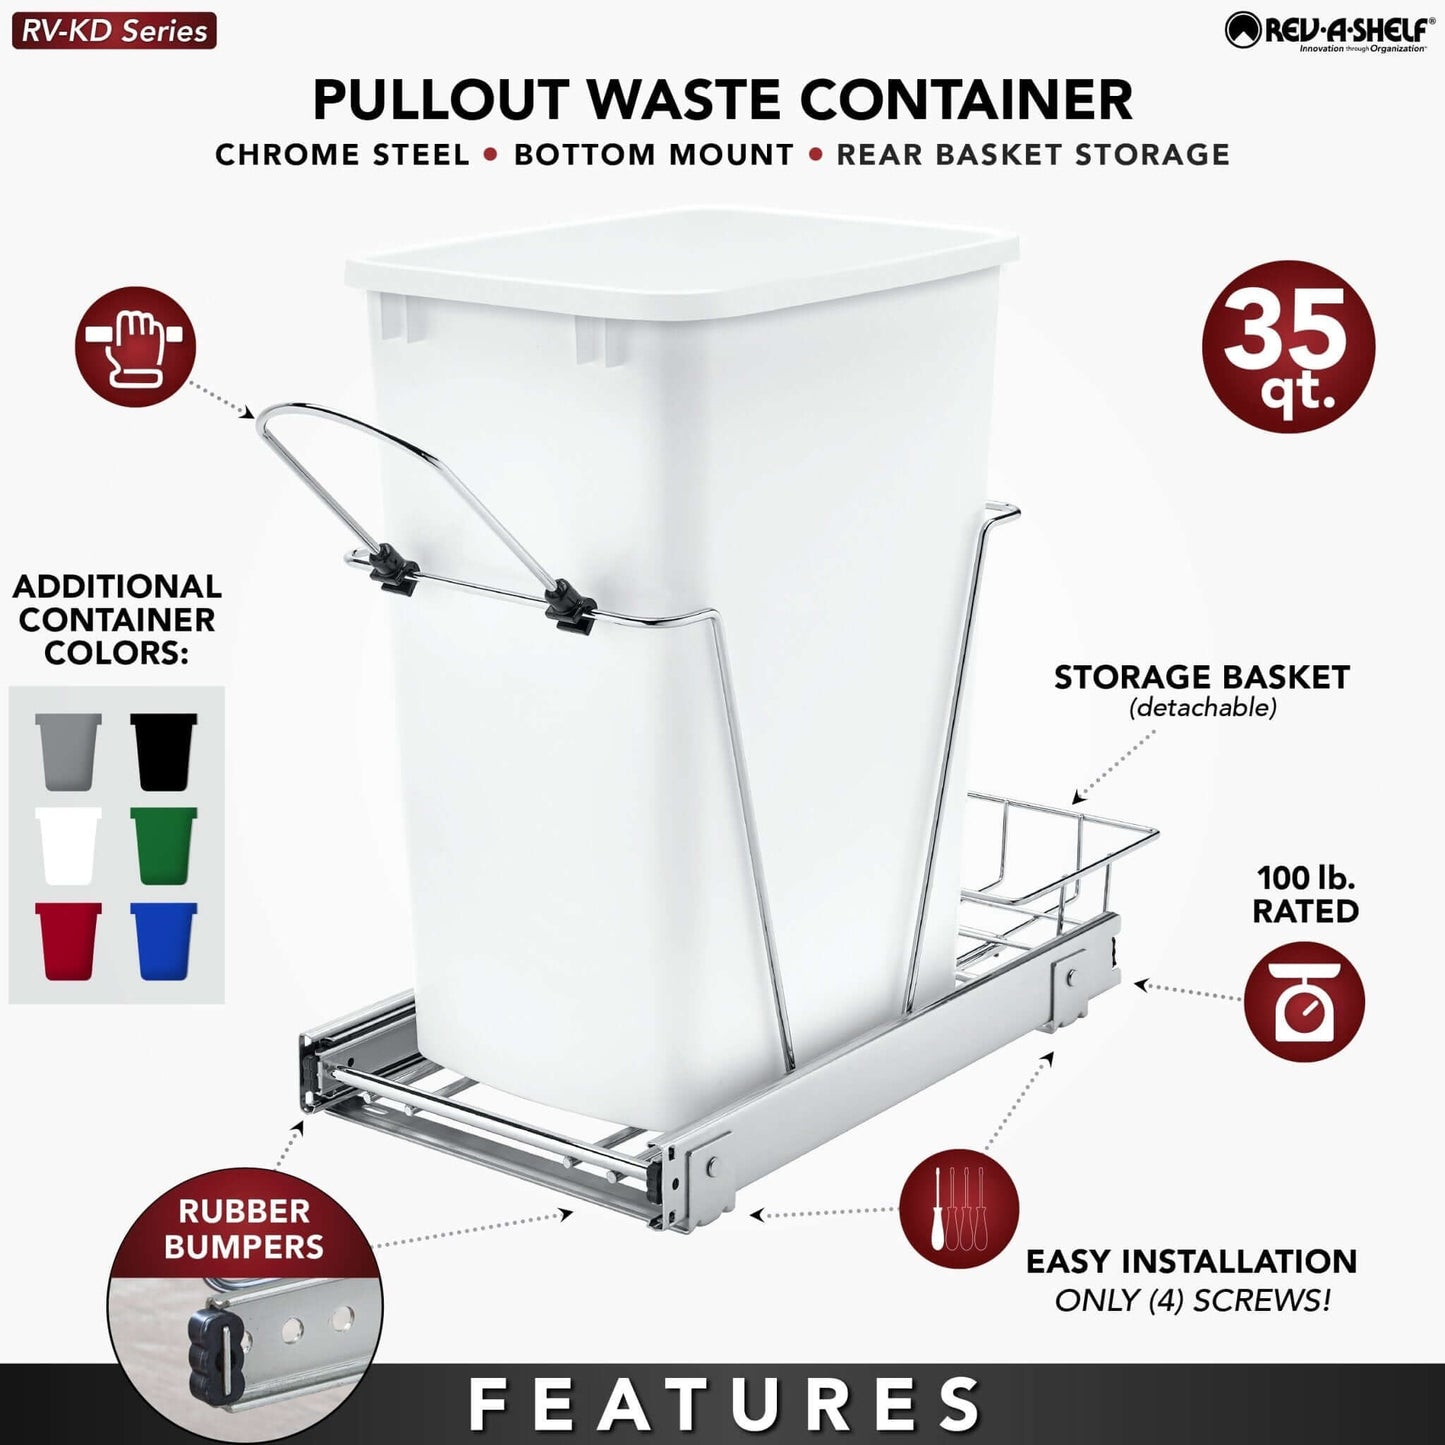 Rev-A-Shelf - Chrome Steel Pull Out Waste/Trash Container w/Rear Basket Storage - RV-12KD-18C S